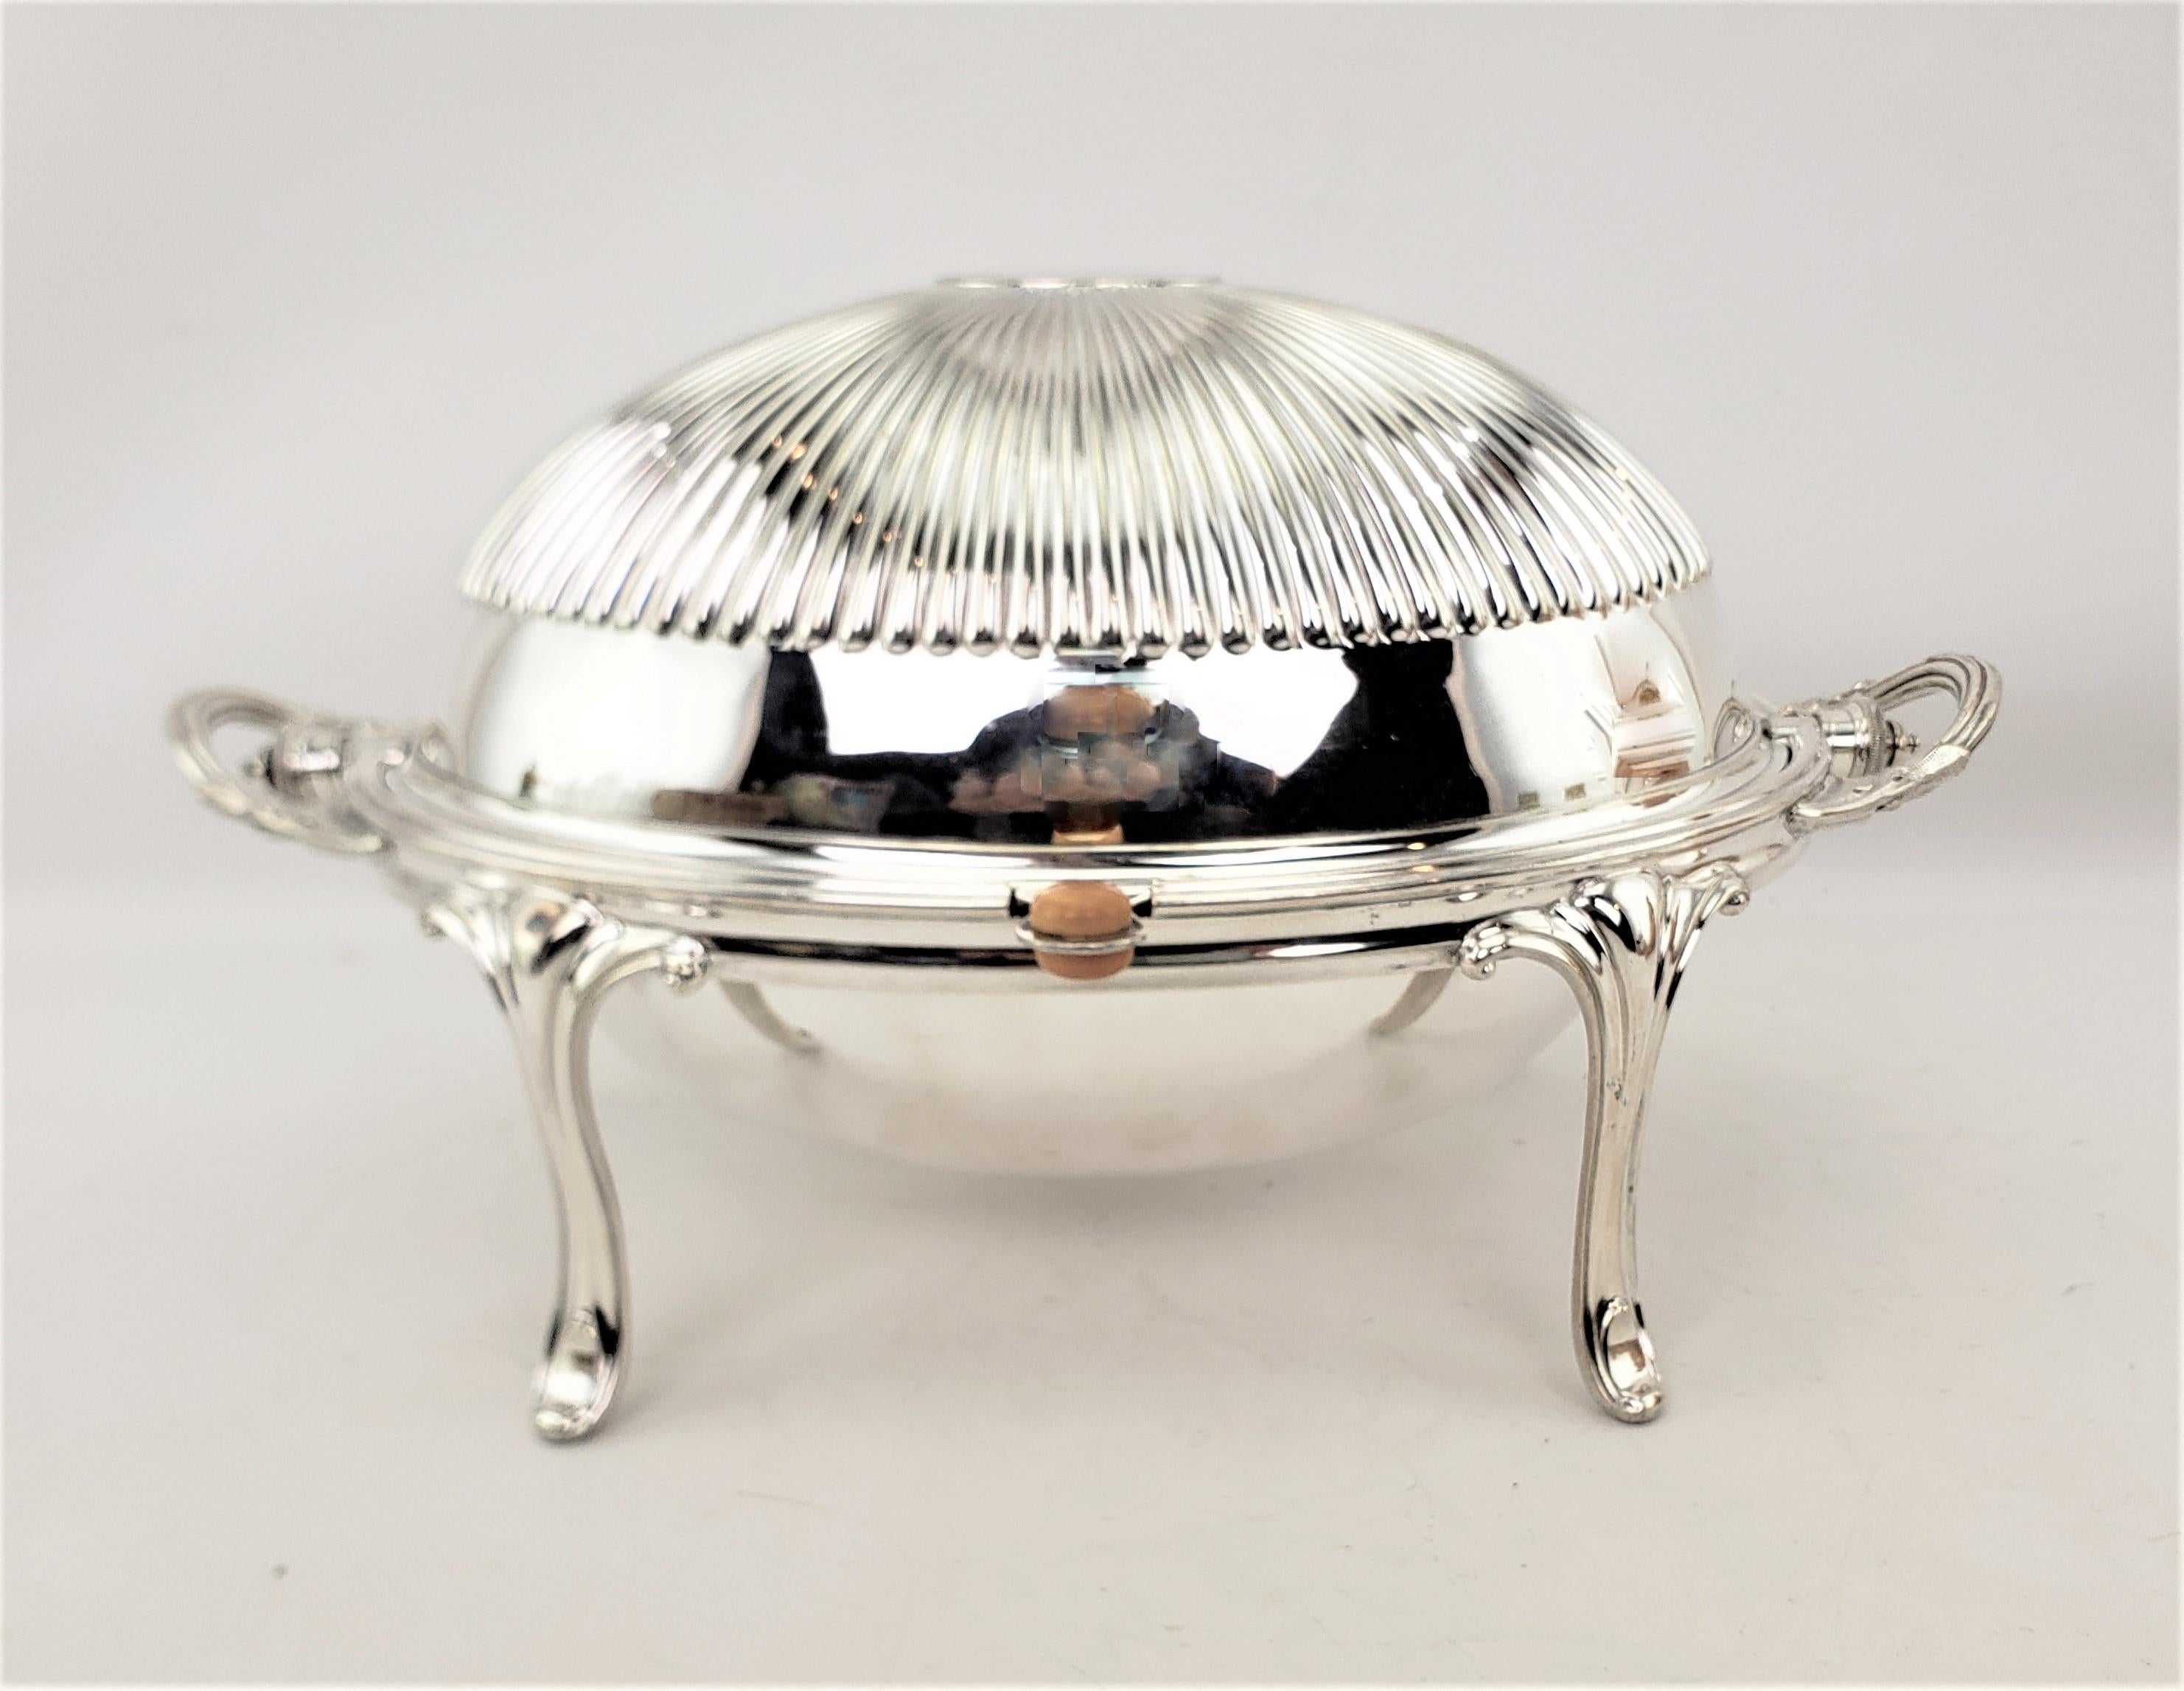 Machine-Made Antique English Silver Plated Domed Breakfast Warmer or Server